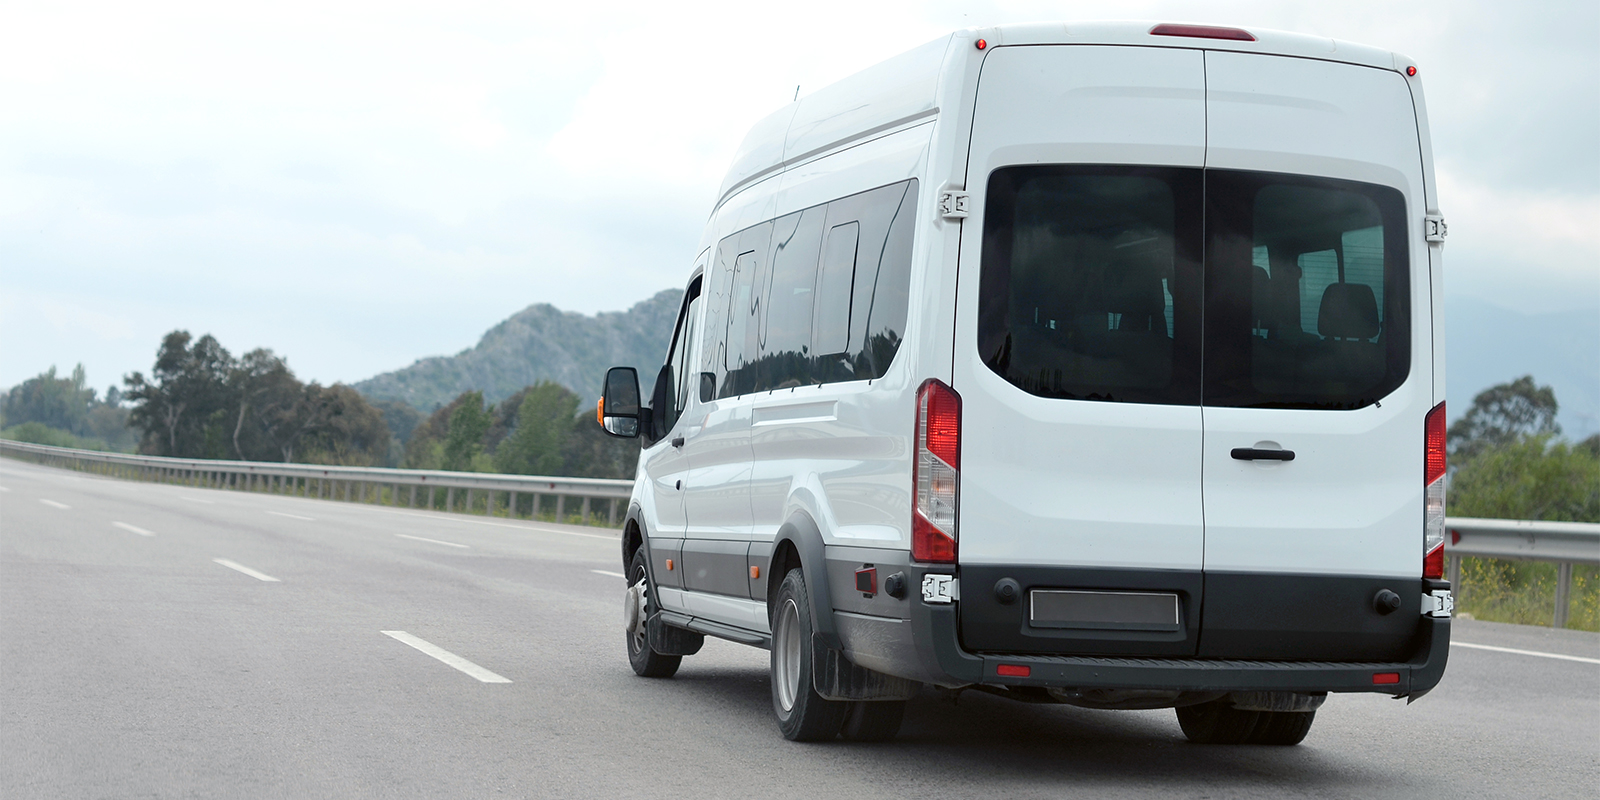 An image of a work van travelling along a highway. Attached to the side of the van are the sensors included with the Rostra 250-1930 kit for detecting vehicles in the van's blind spot.